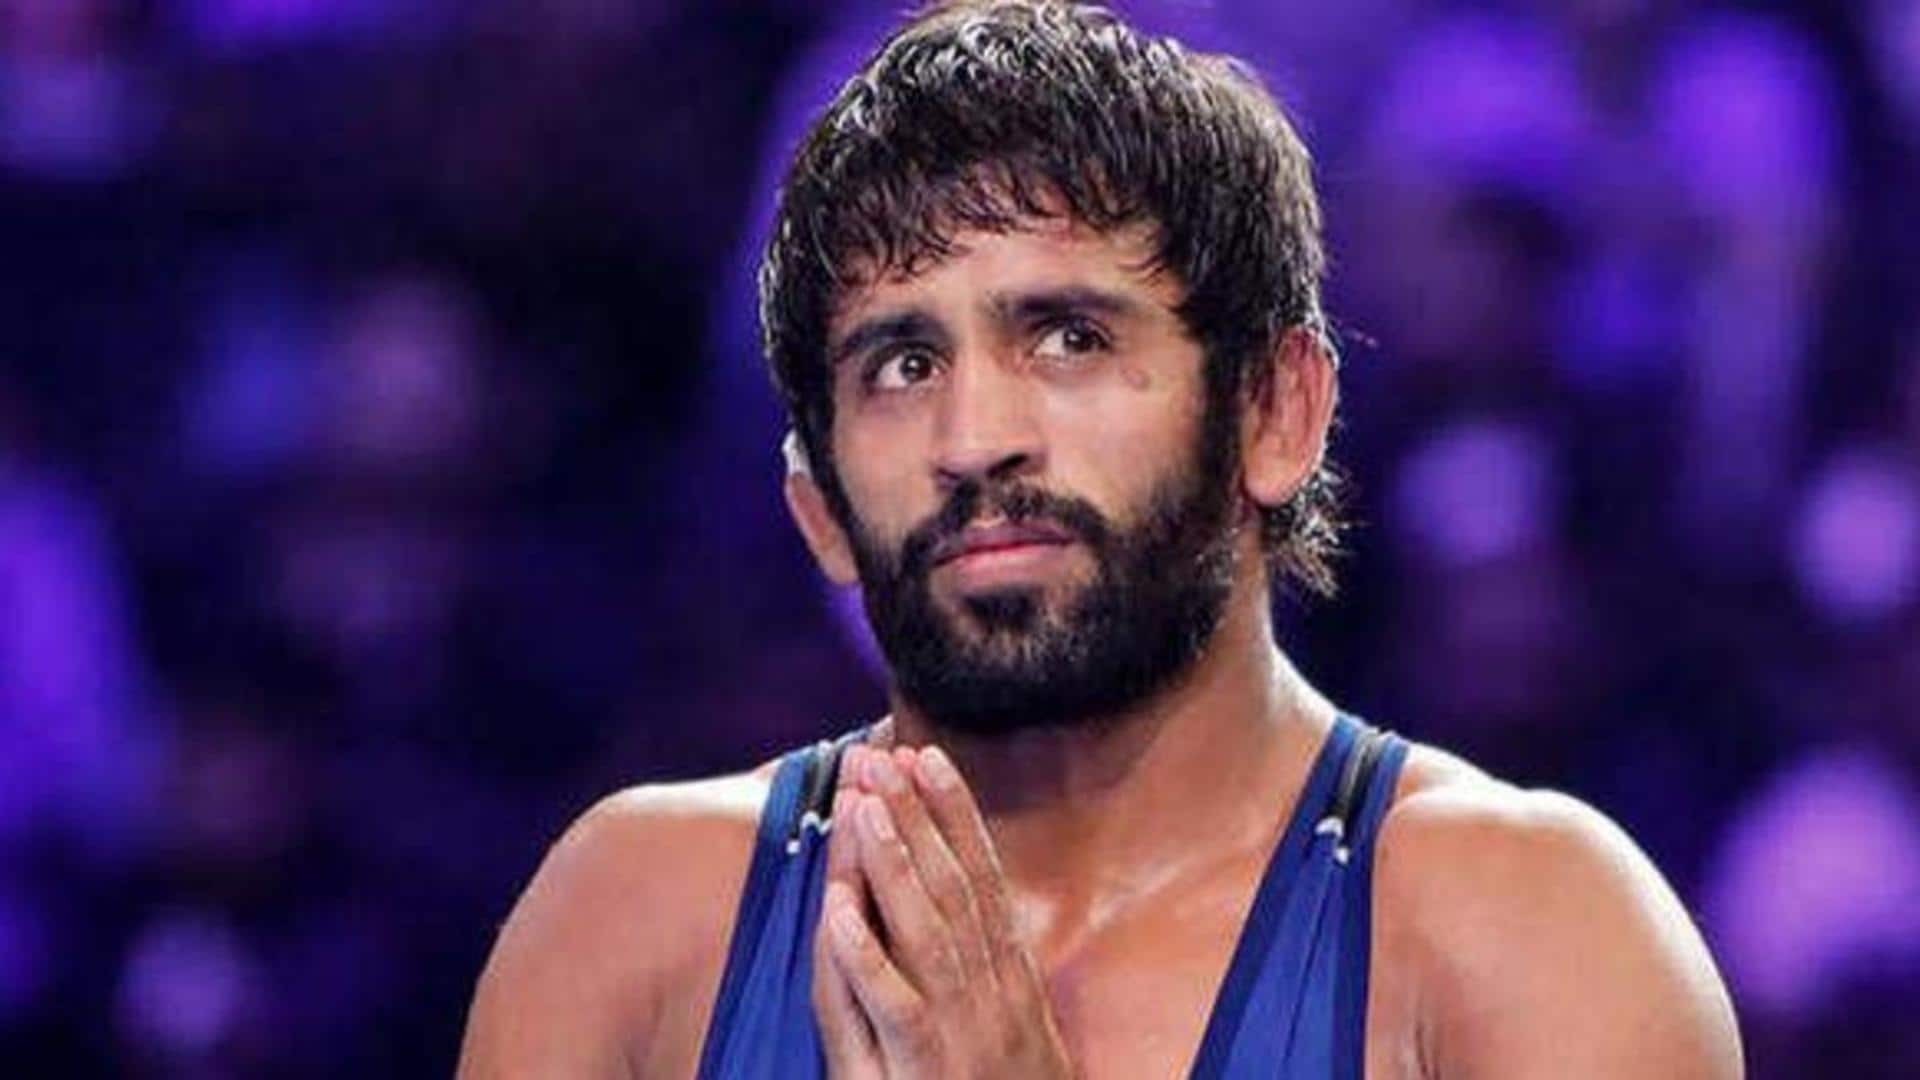 'Please support us': Bajrang Punia's emotional appeal amid wrestlers' protest